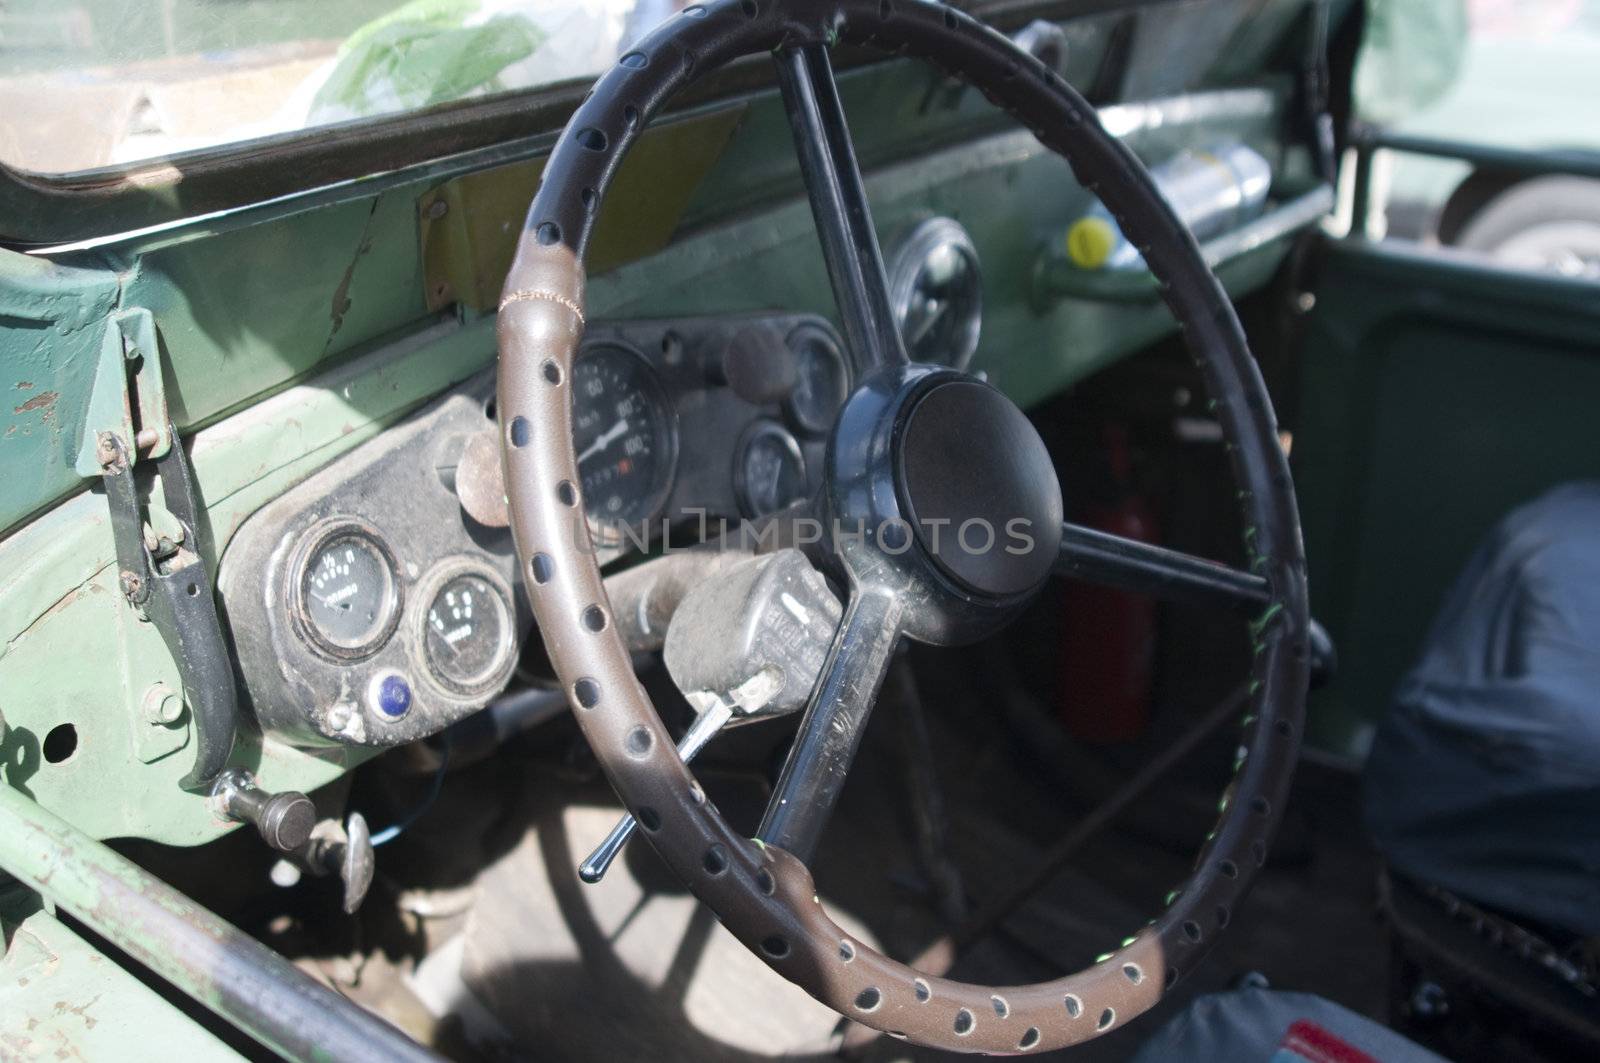 High resolution image. Dashboard of vintage Russian seventies car.